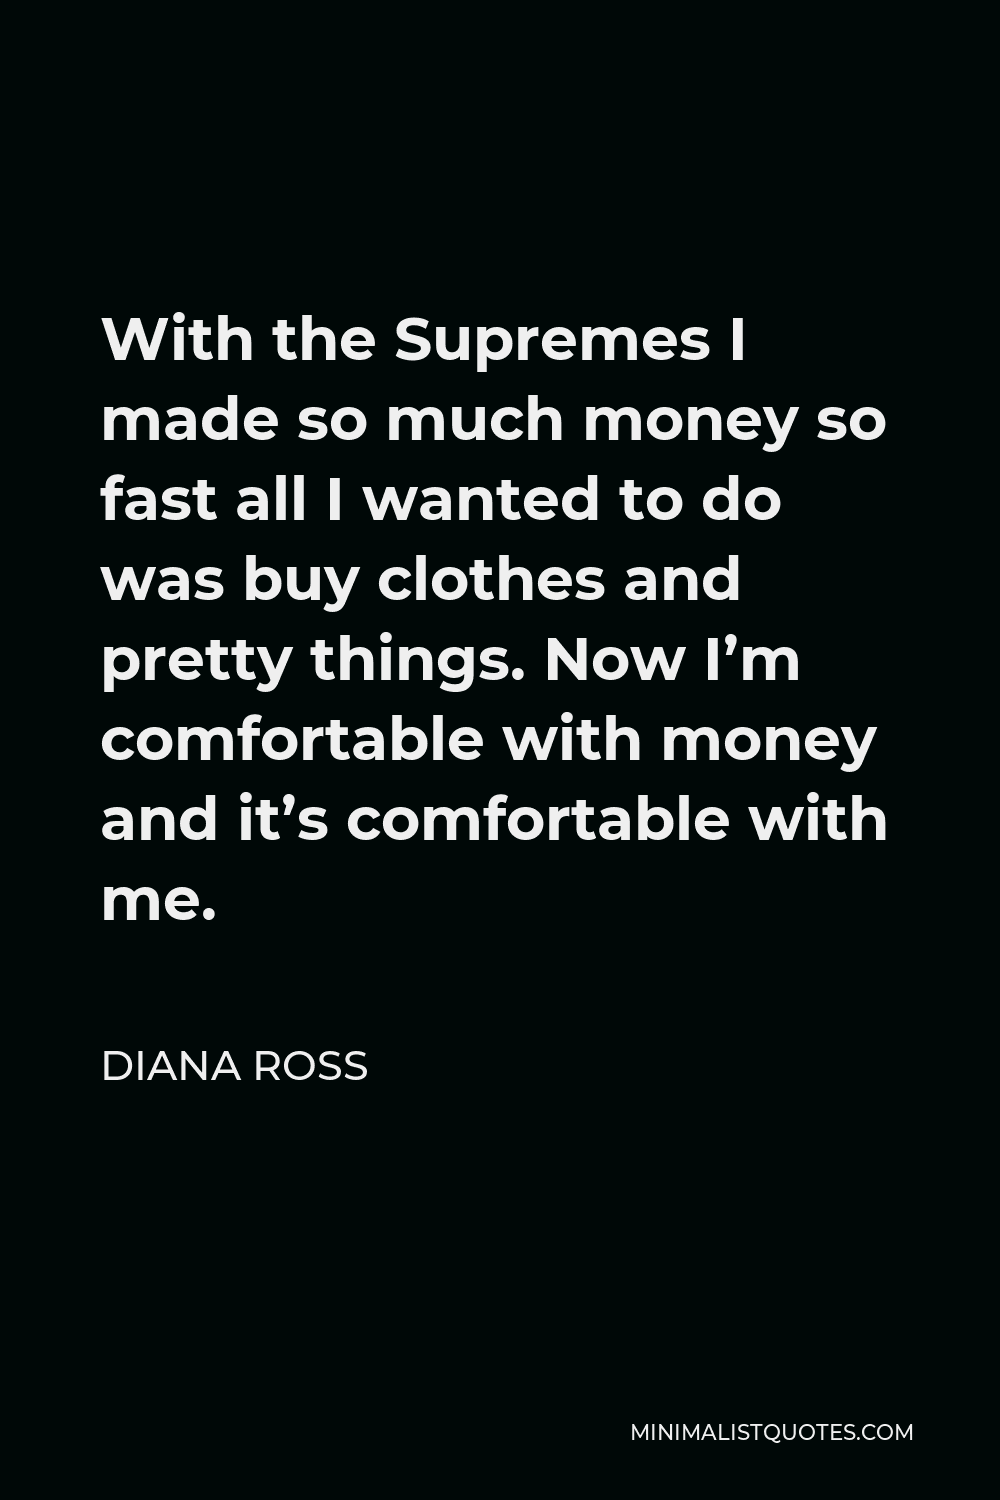 Diana Ross Quote - With the Supremes I made so much money so fast all I wanted to do was buy clothes and pretty things. Now I’m comfortable with money and it’s comfortable with me.